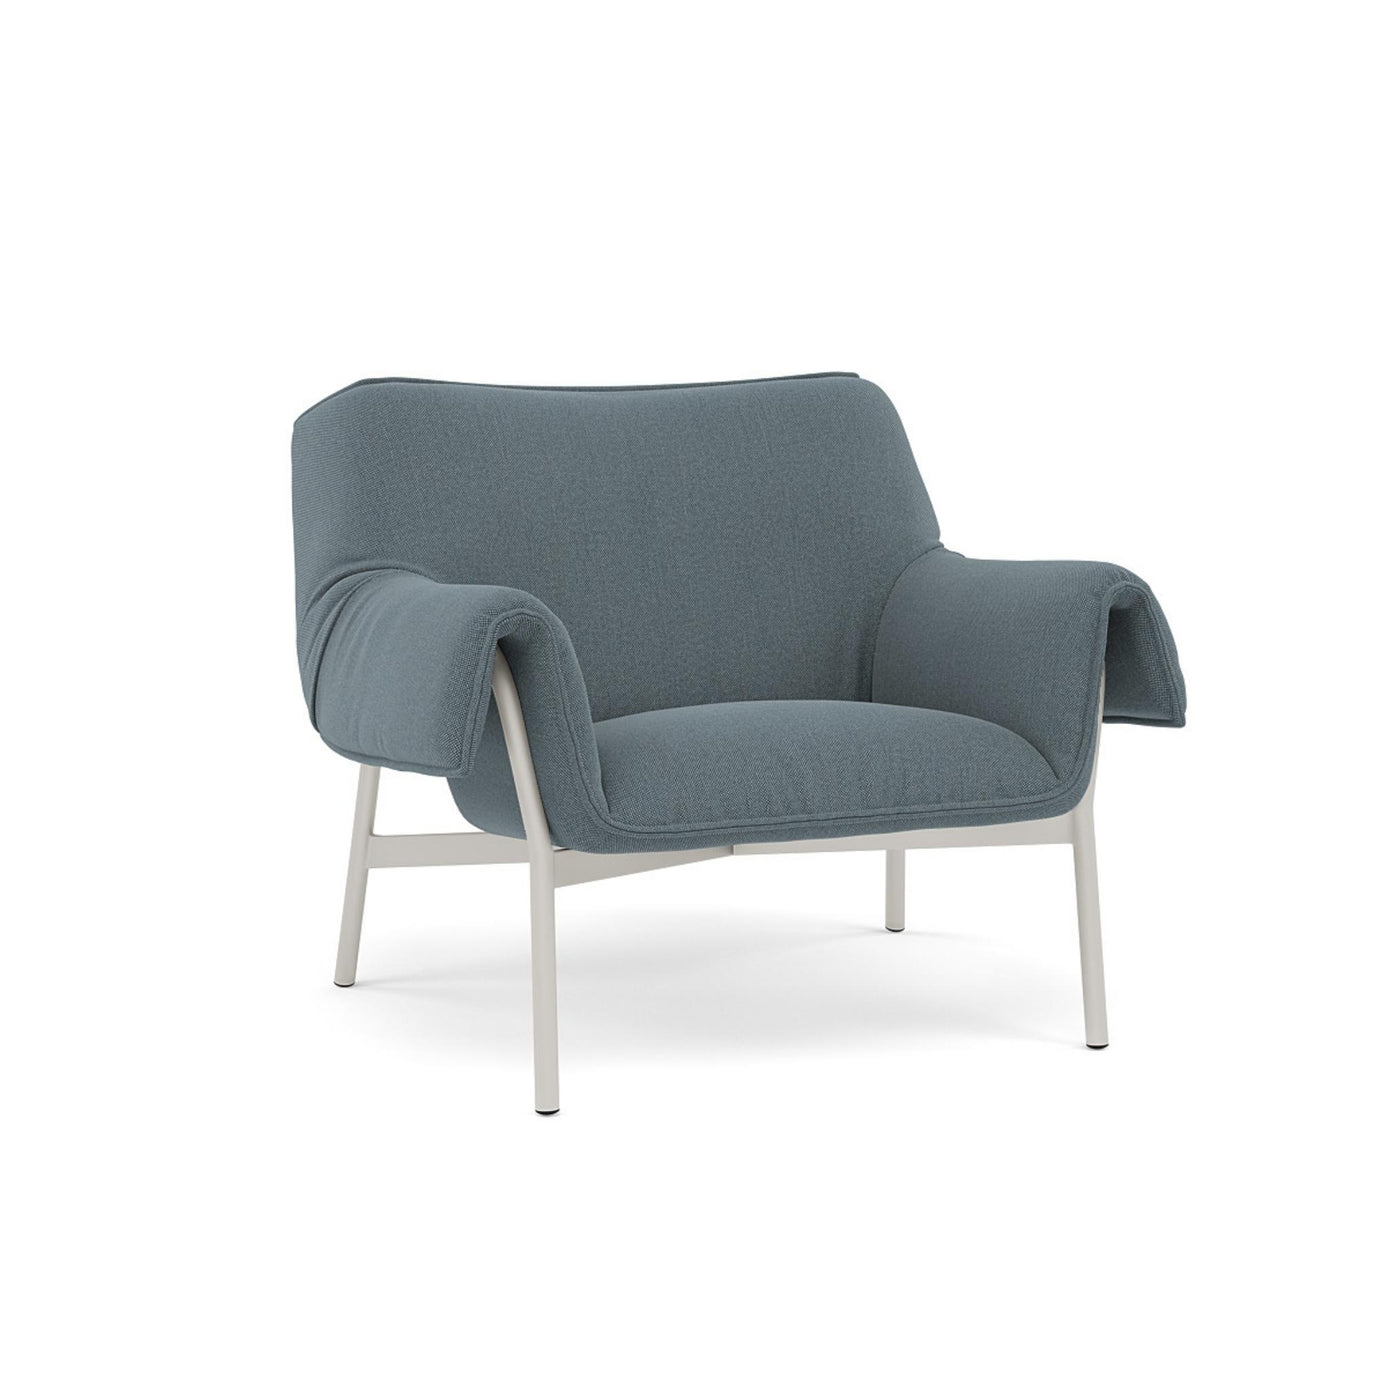 Muuto Wrap Lounge Chair. Made to order from someday designs. #colour_re-wool-768